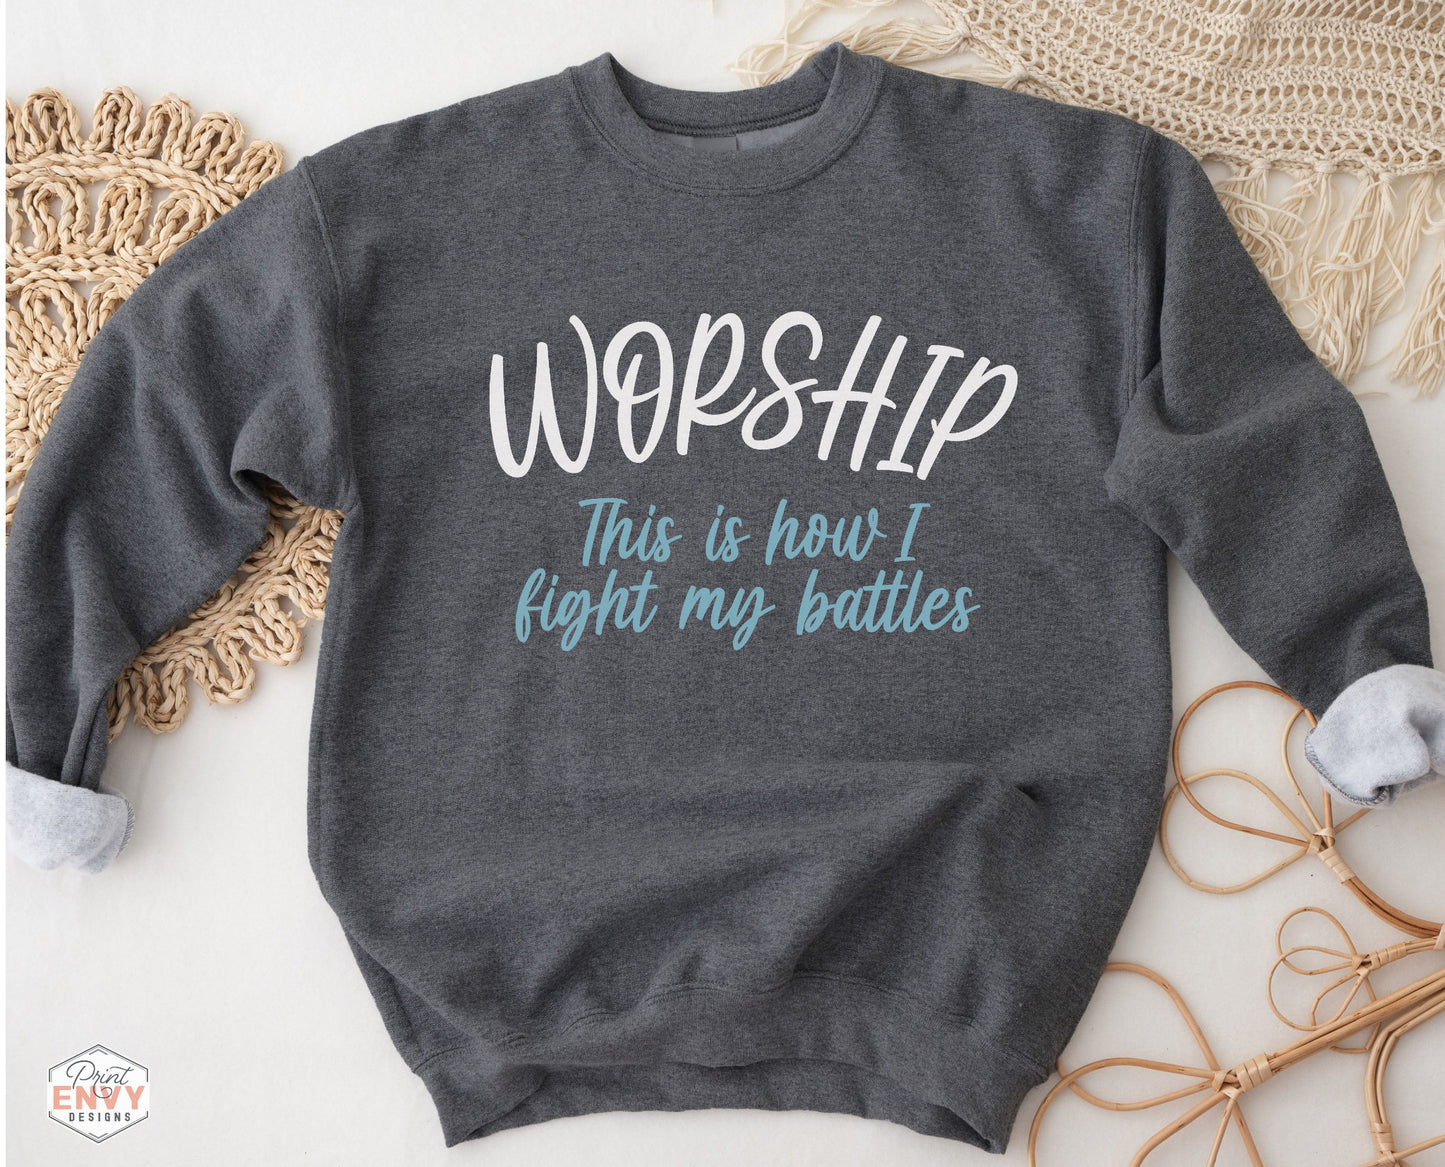 Worship This Is How I Fight My Battles Christian aesthetic unisex crewneck sweatshirt design printed in white and teal on cozy heather dark gray sweater for women, great gift for worship leaders